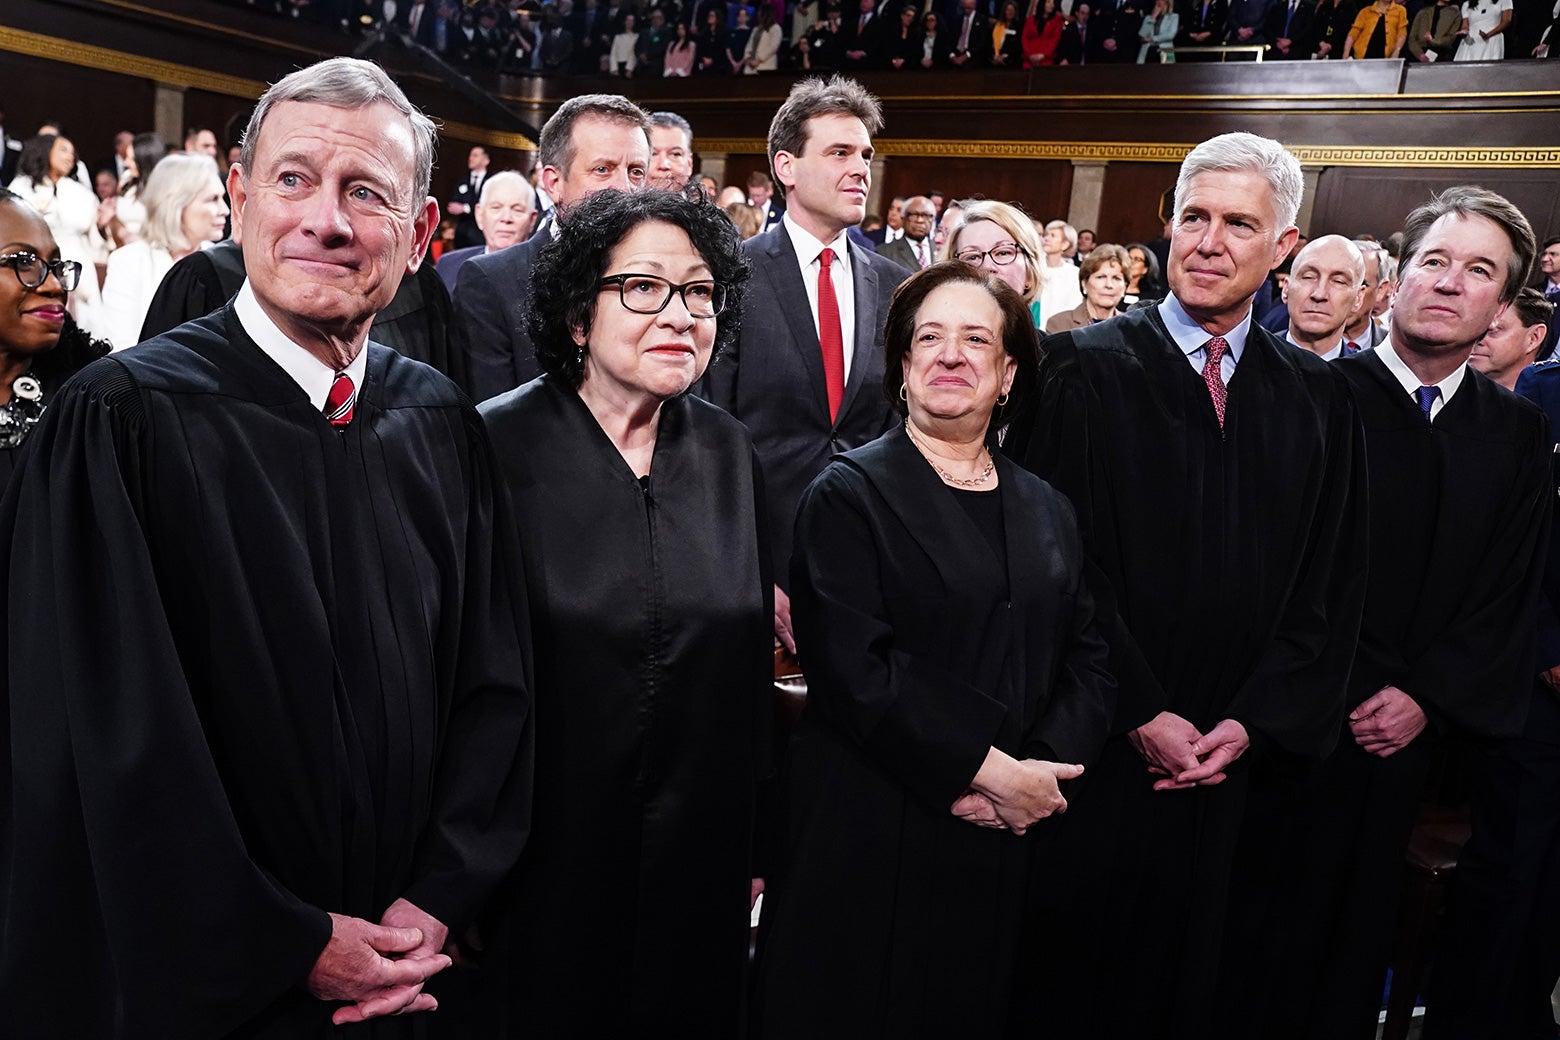 The justices stand together wearing their black robes and smiling.